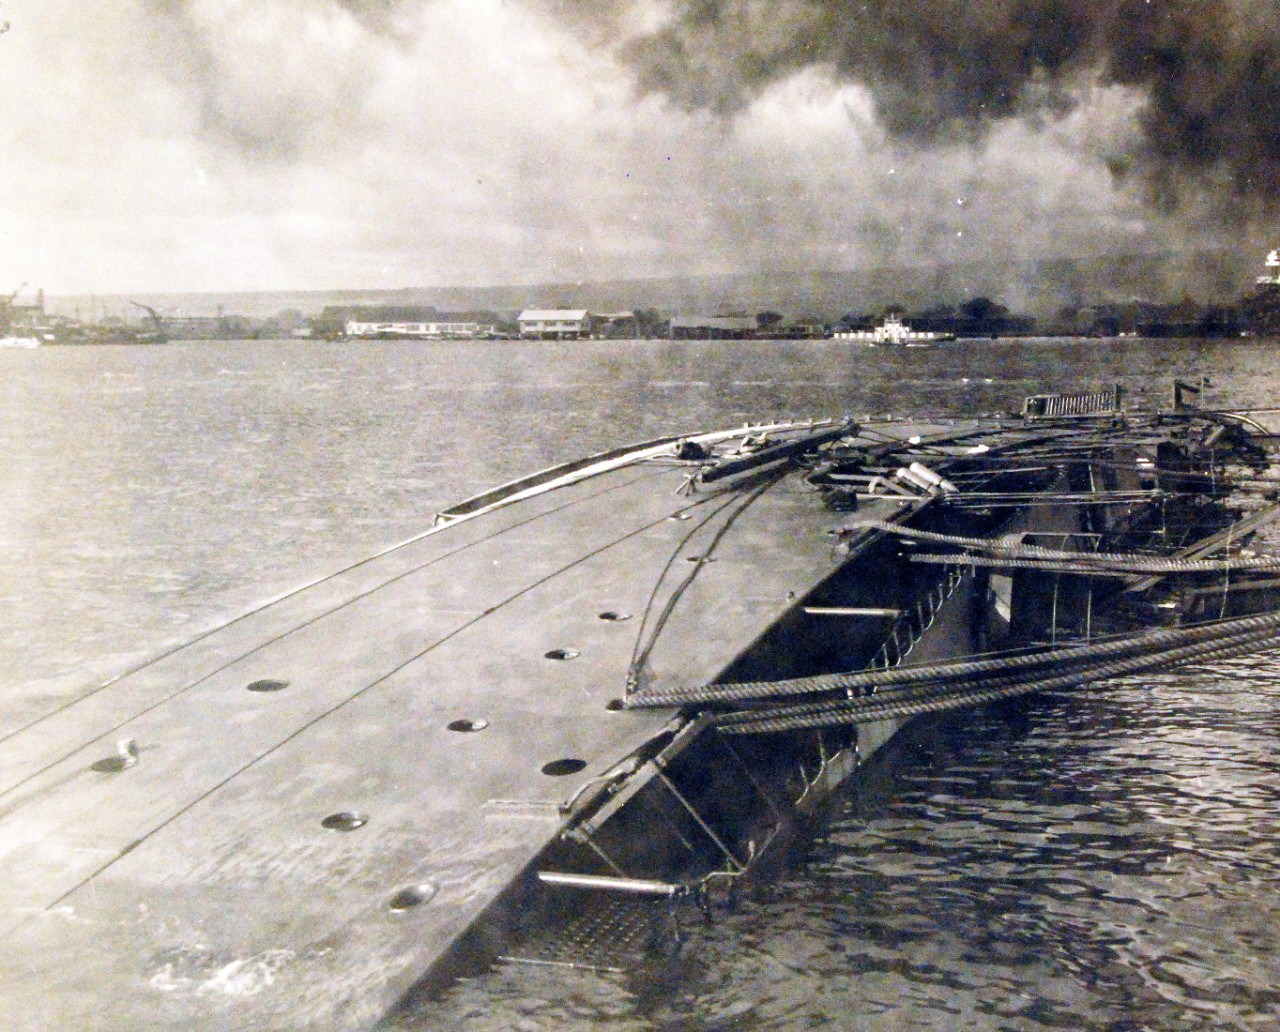 80-G-32532:  Japanese Attack on Pearl Harbor, December 7, 1941.  USS Oglaga (CM 4), capsized alongside 1010 dock at Pearl Harbor following the attack. Official U.S. Navy photograph, now in the collections of the National Archives.    (9/15/15).